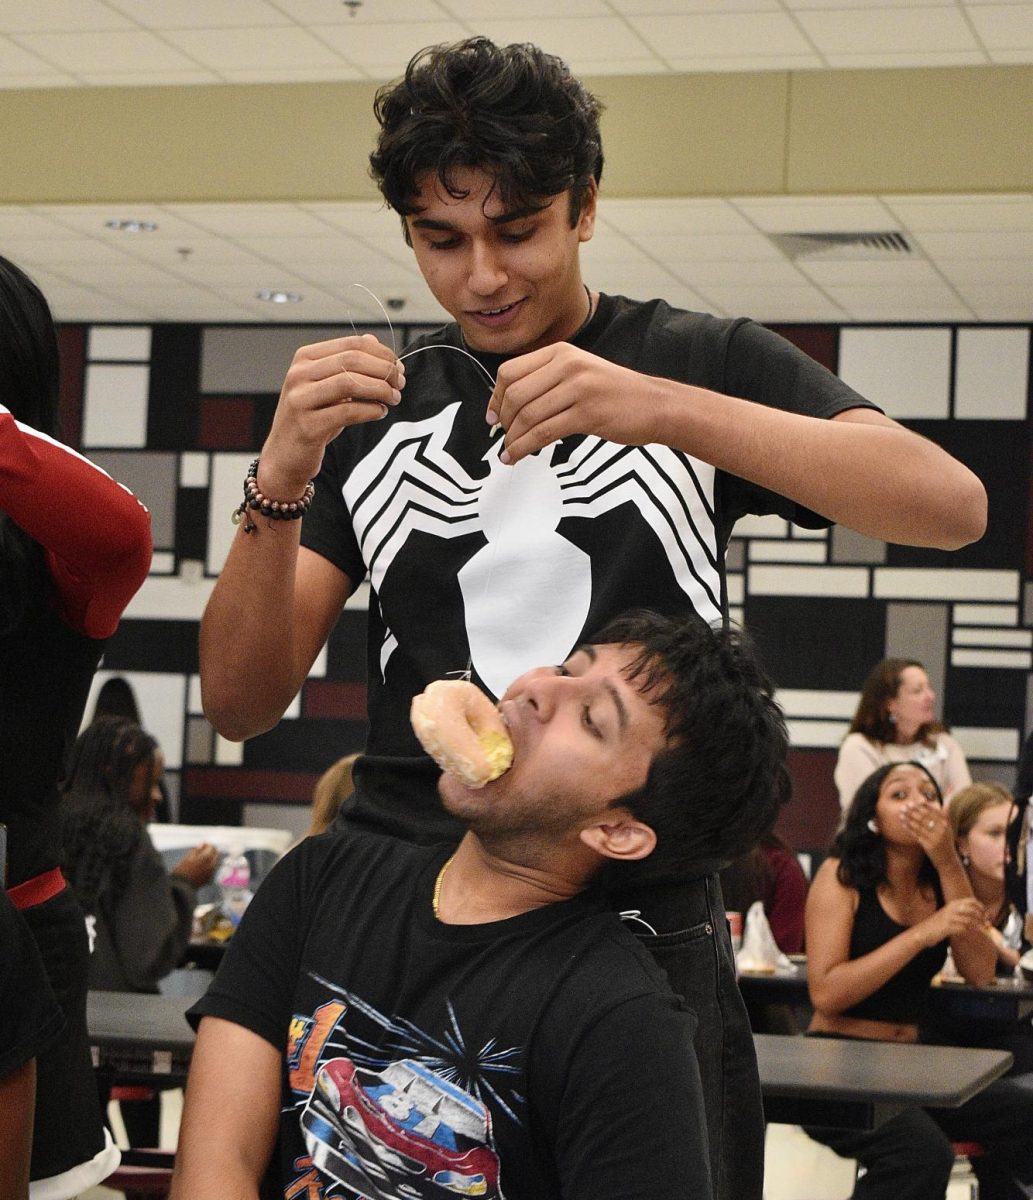 Seniors Hari Kommu and Raushan Goureddy participate in the donut lunch game on Friday, Sept. 29, attempting to be the first team to fully eat the sugary dessert. Kommu and Goureddy ultimately came in second, however, and the junior team claimed the victory.